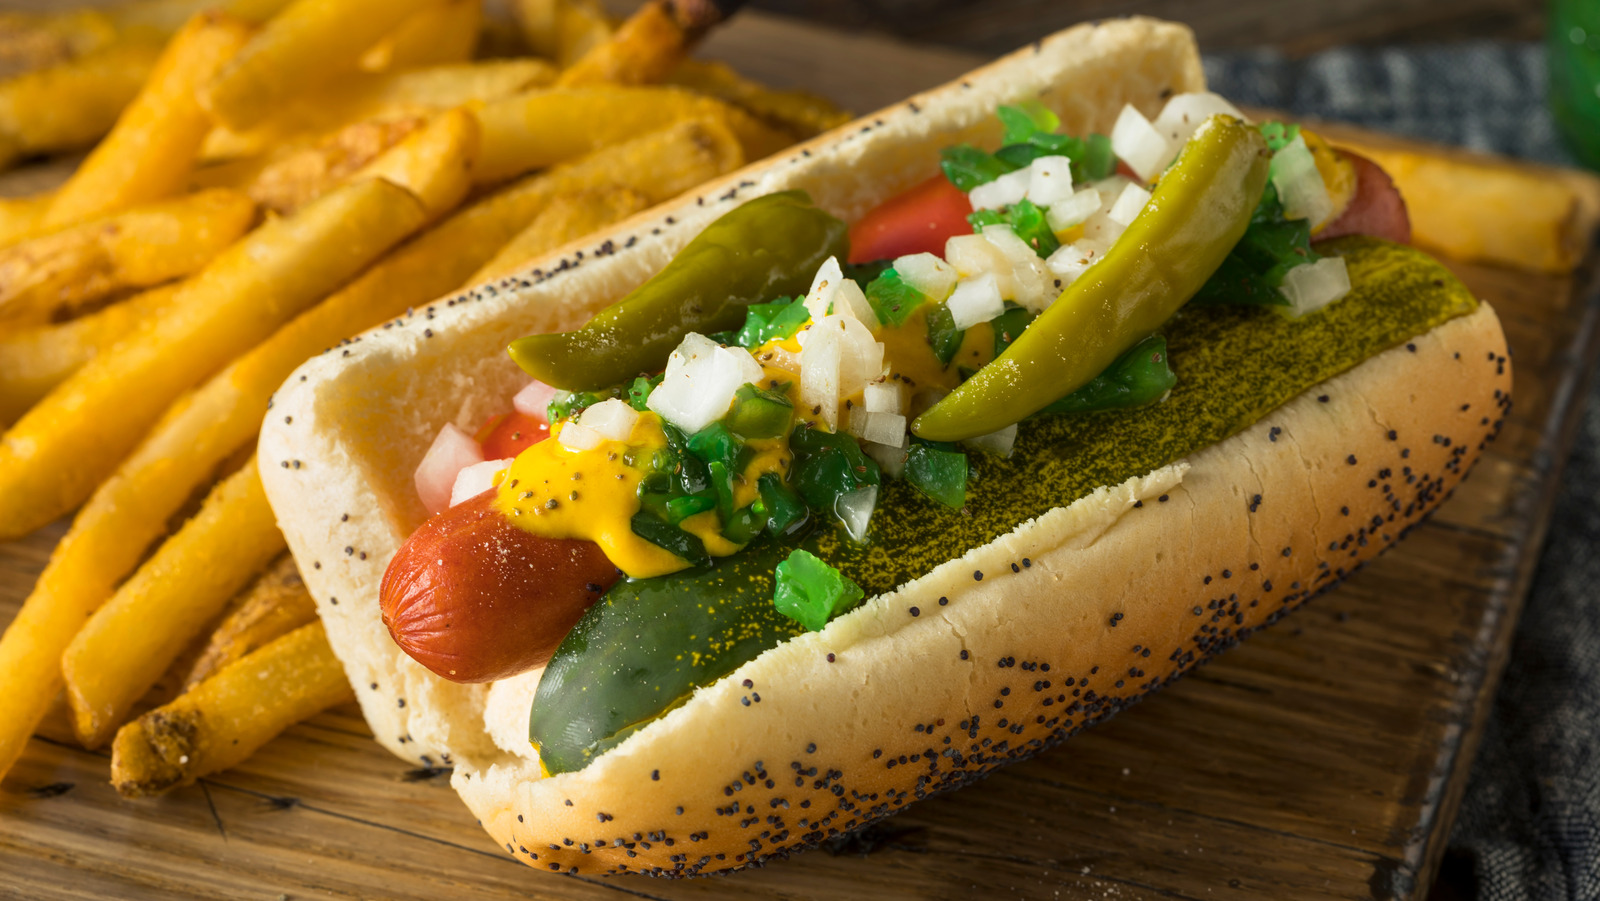 What Makes Chicago-Style Hot Dogs Unique?